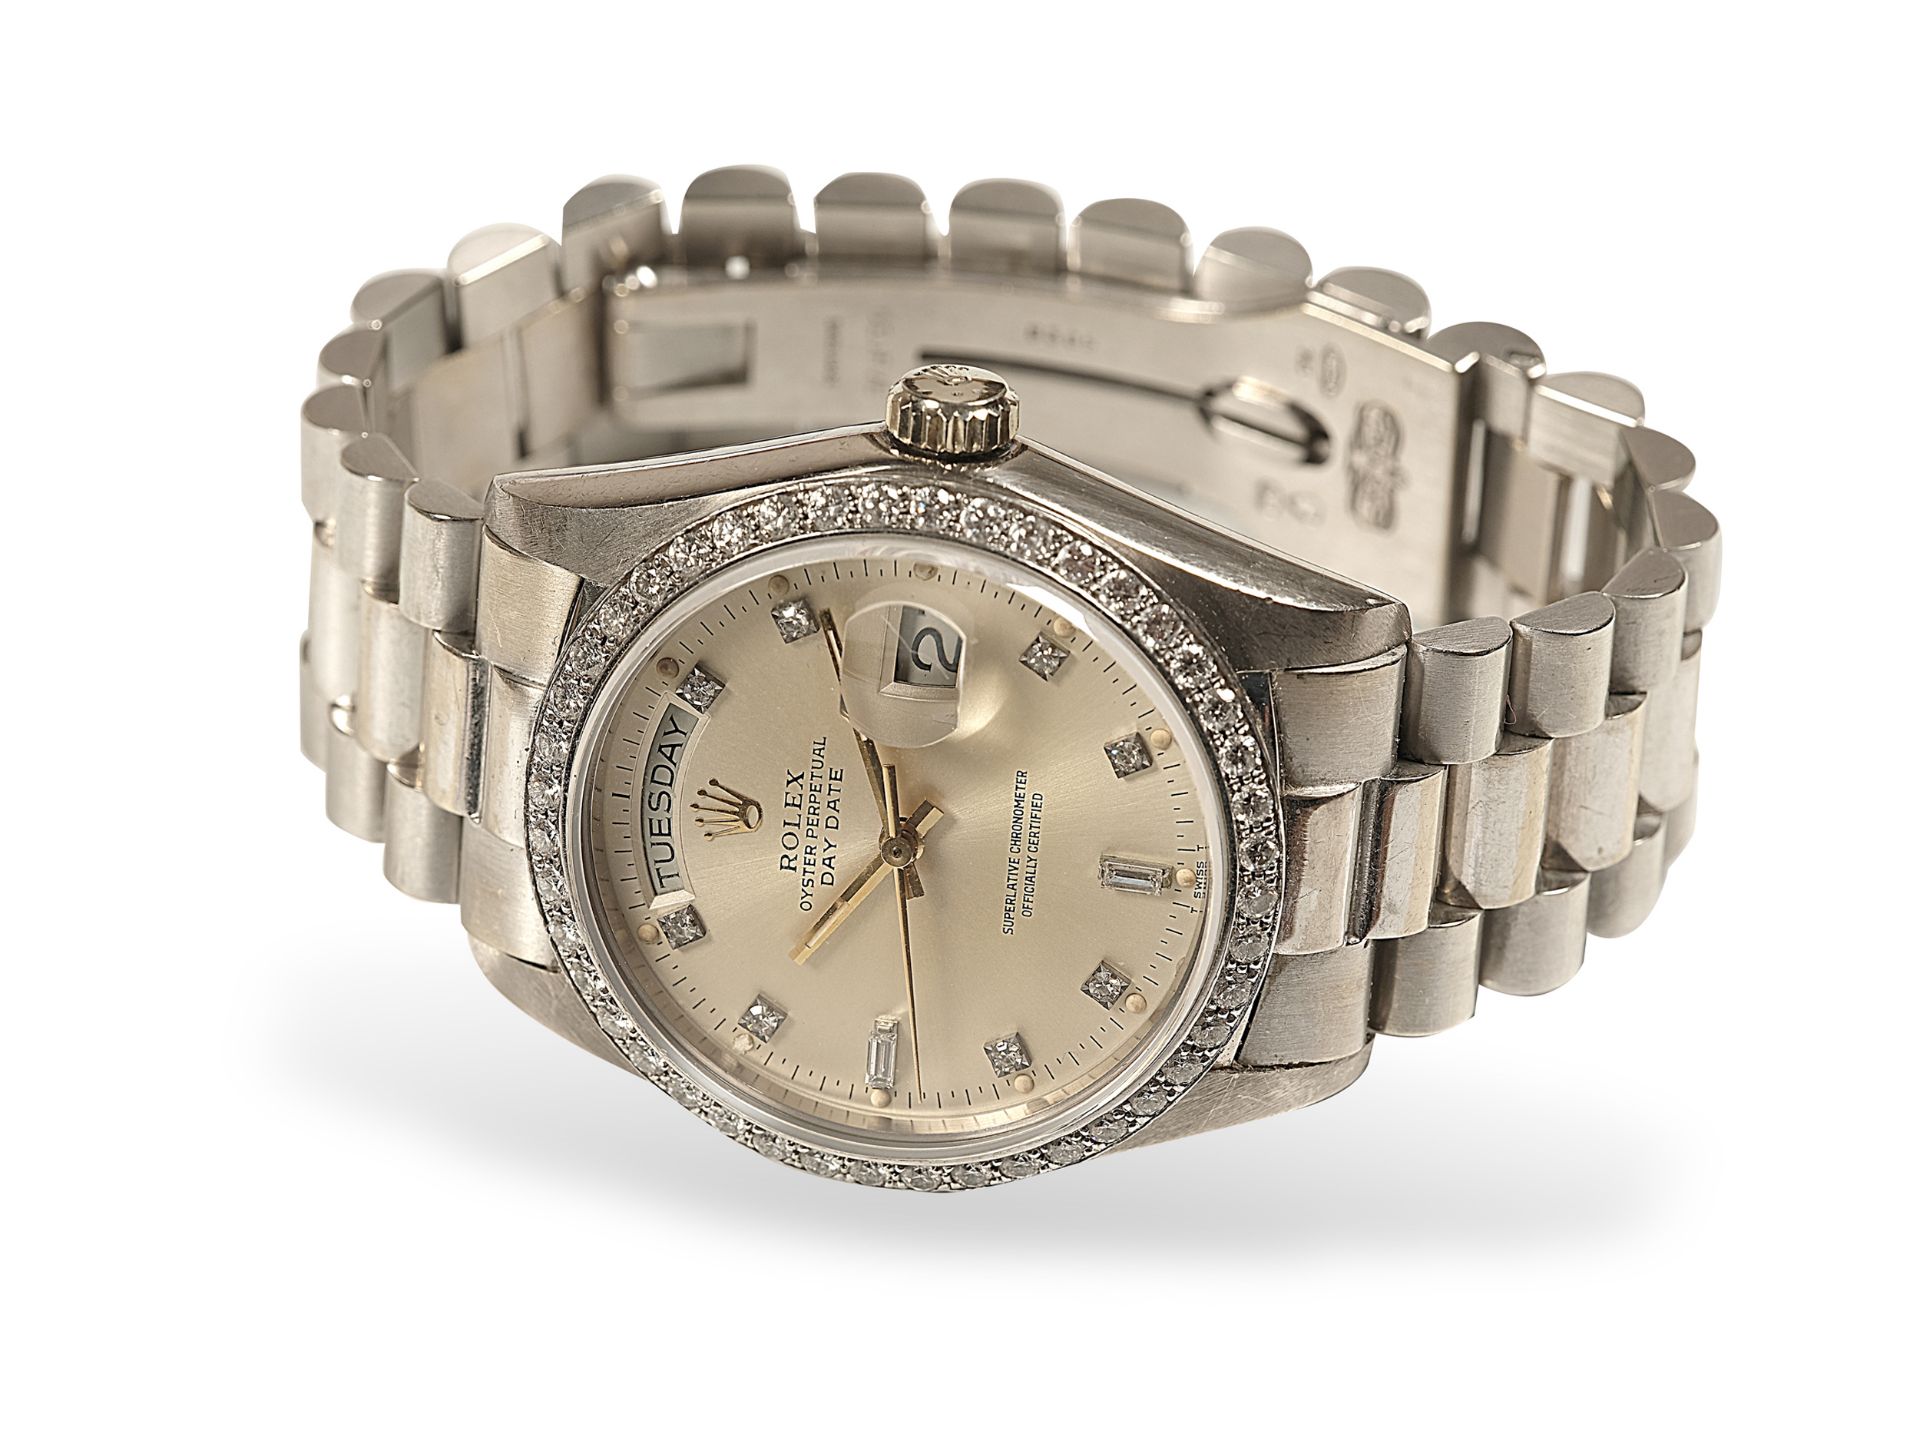 Rolex Oyster Perpetual Day Date, White gold, 18 carat, With diamond bezel - Image 2 of 8